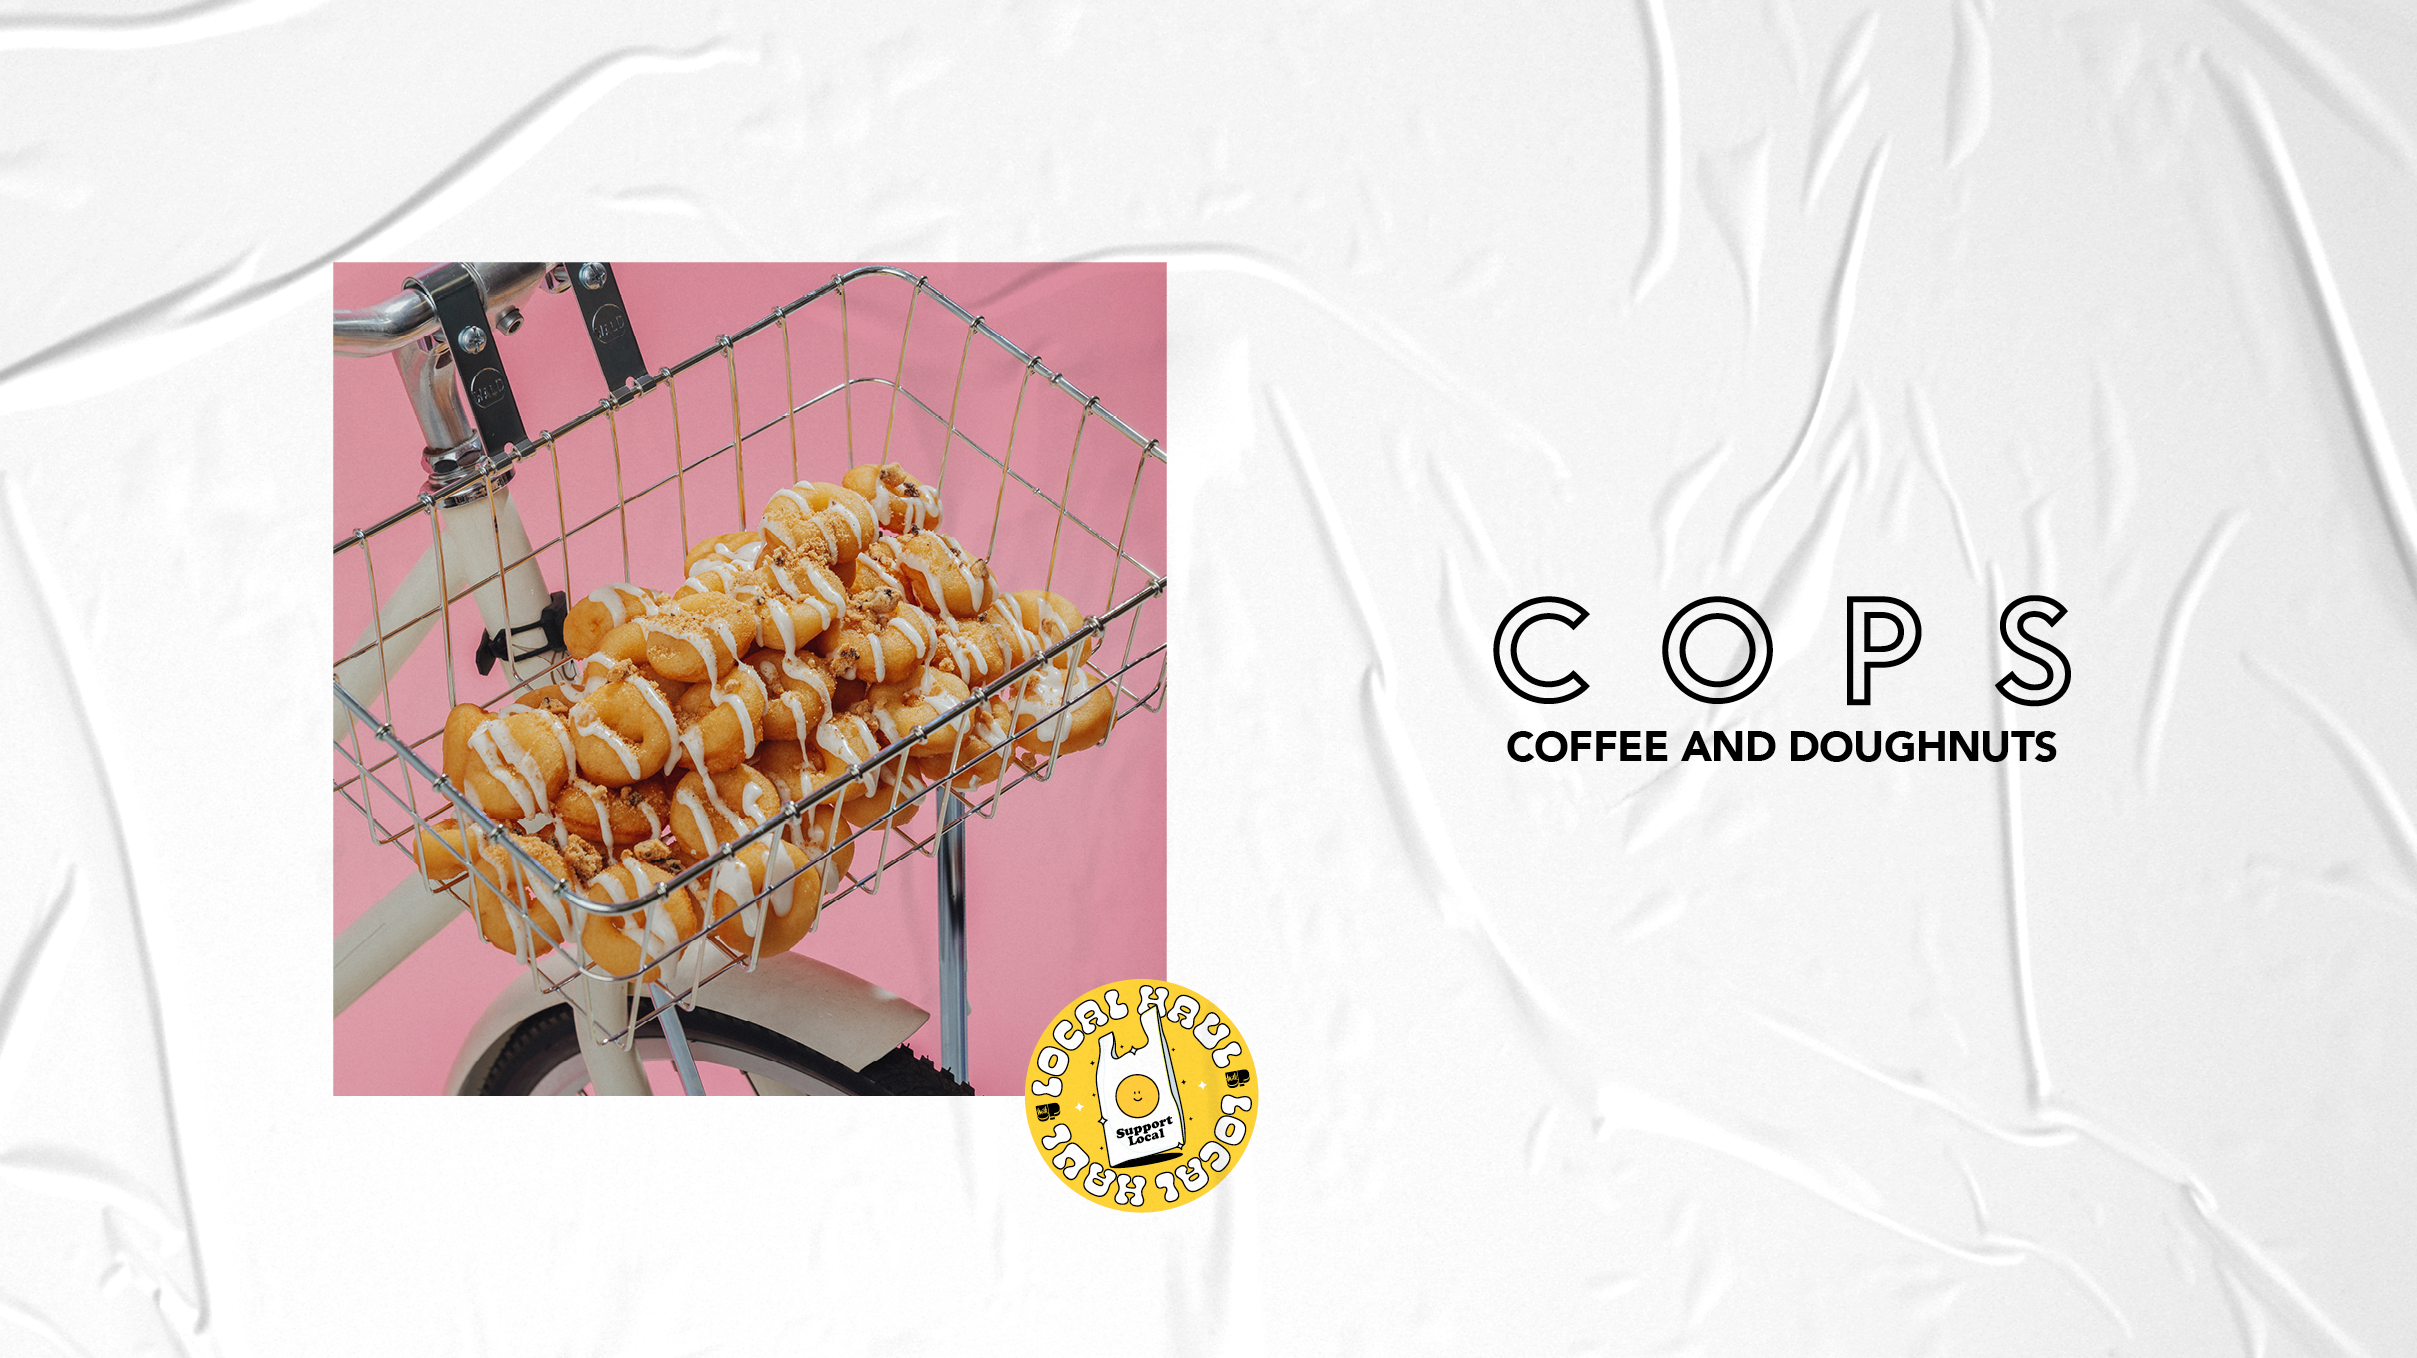 Donuts with icing inside a bicycle rack from Cops Coffee and Doughnuts